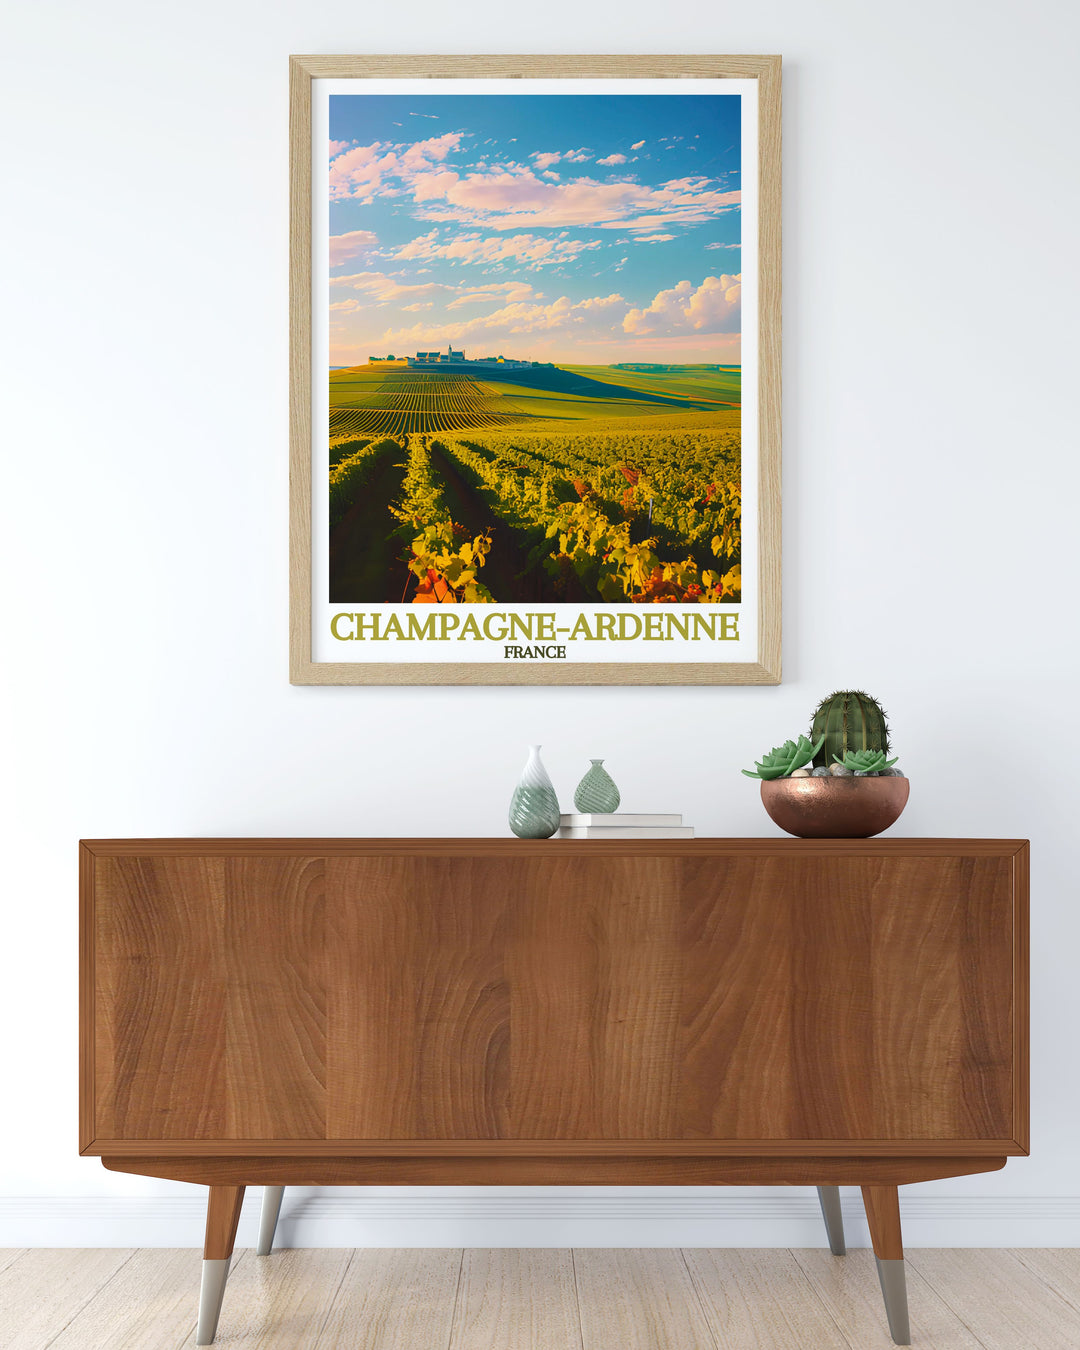 France travel print featuring the picturesque Montagne de Reims and its charming surroundings. This modern art piece is ideal for adding a touch of French elegance to your home, making it a great gift for any occasion.